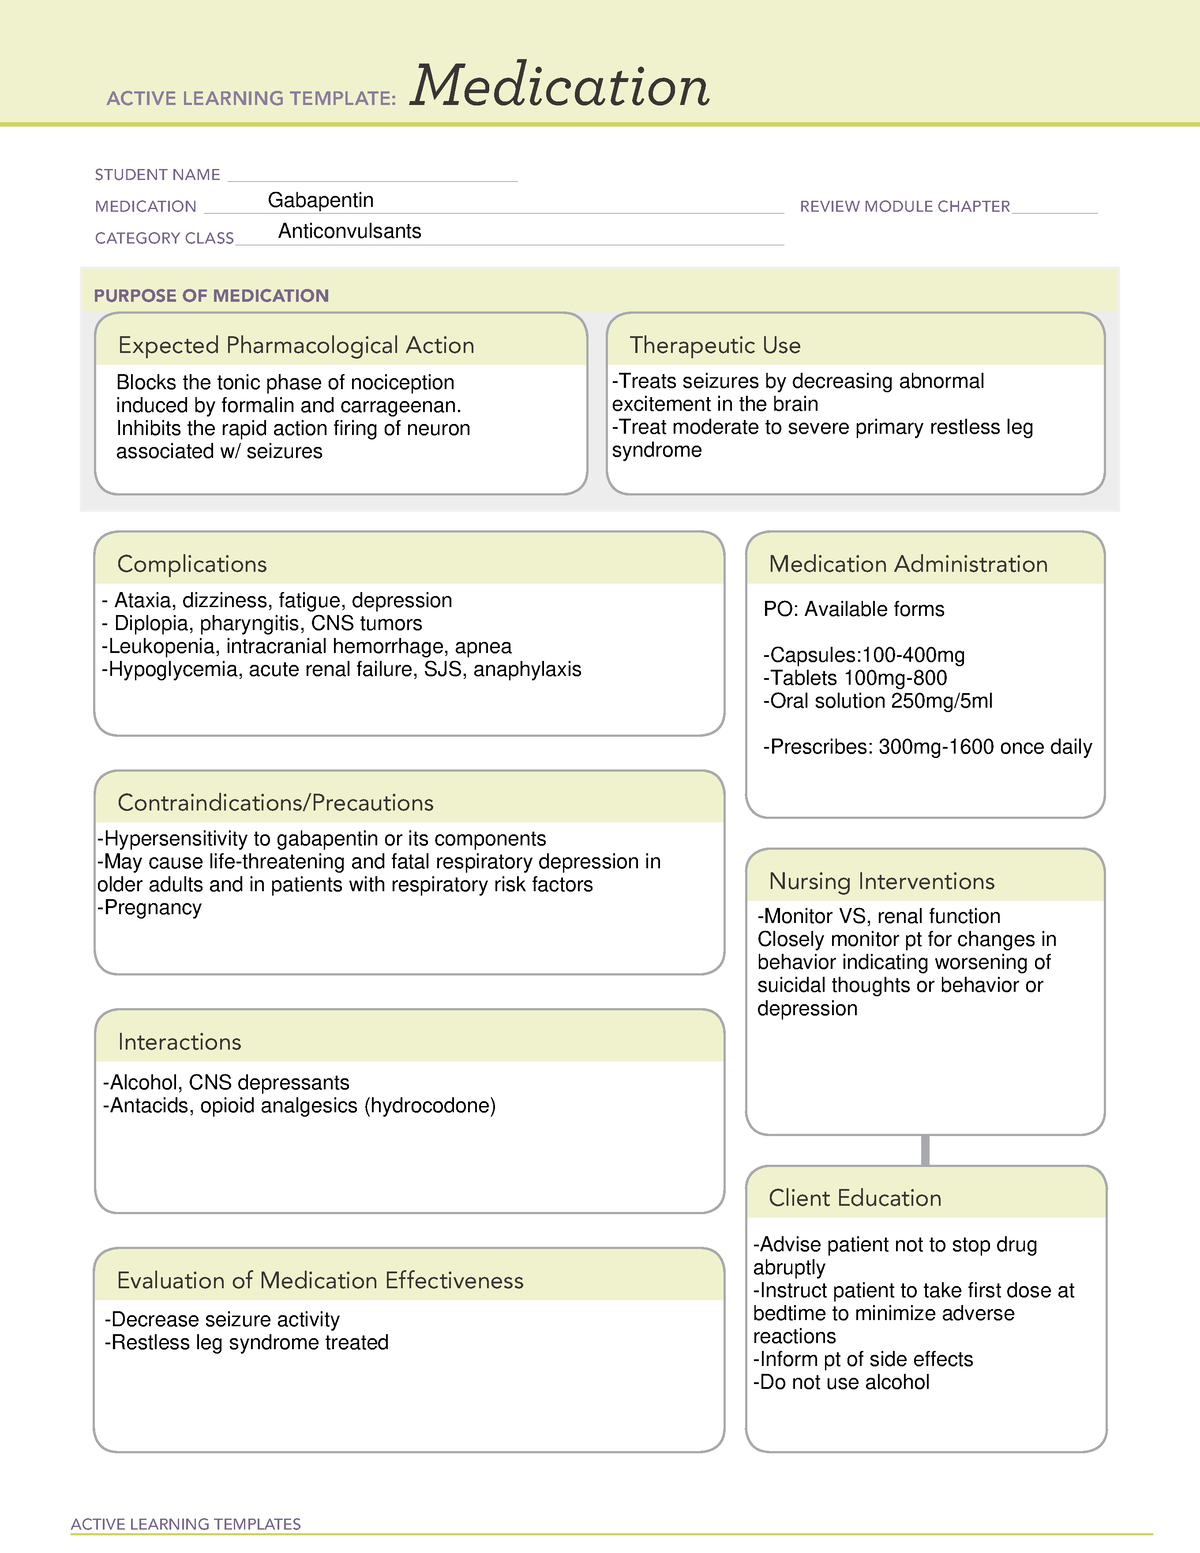 Gabapentin ATI med Medication template for ATI ACTIVE LEARNING